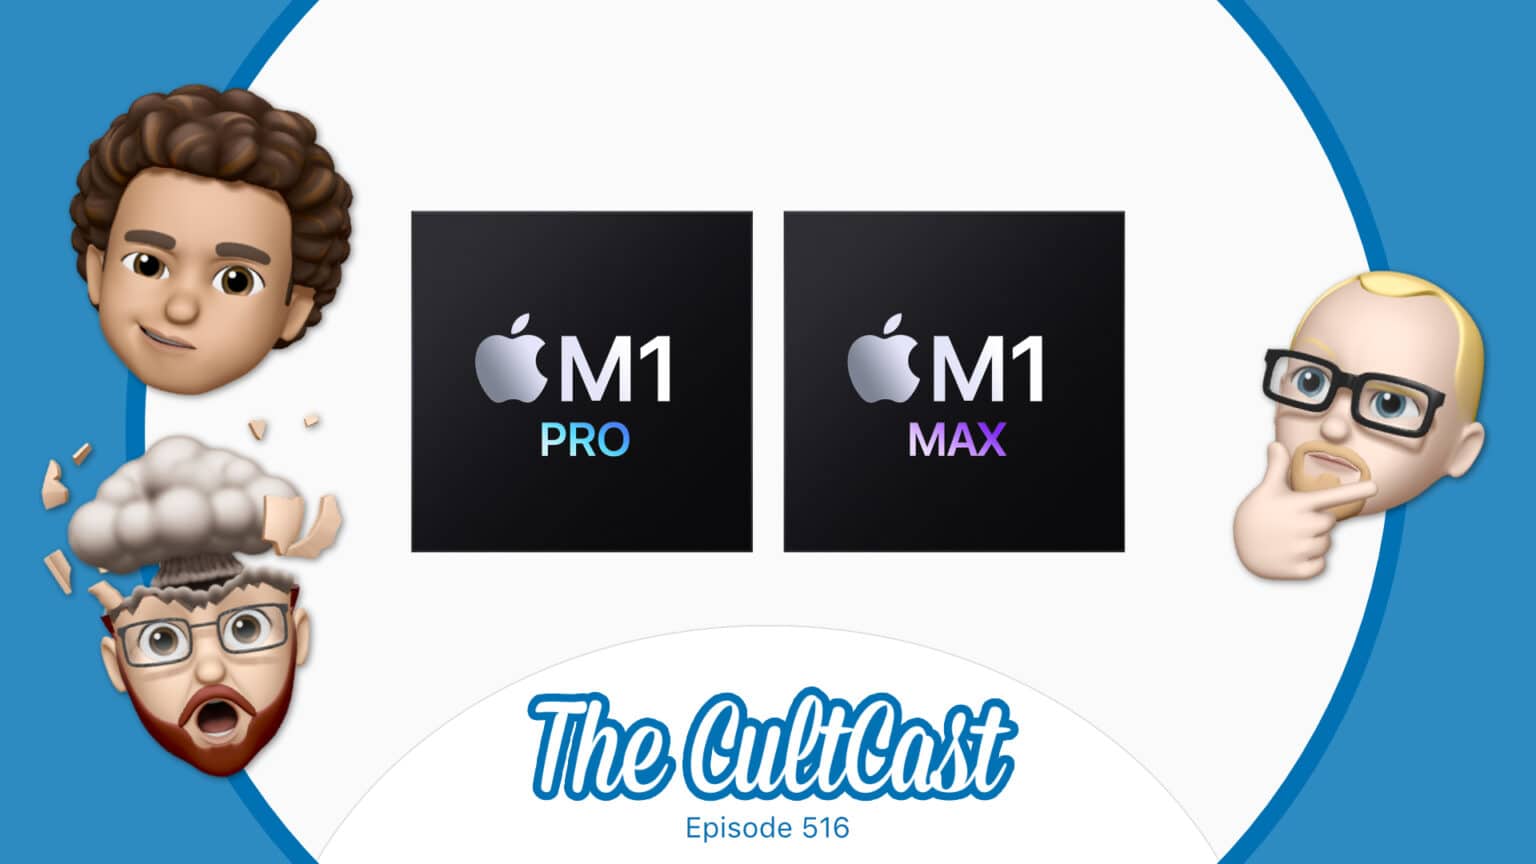 The CultCast: M1 Pro and M1 Max benchmarks show what nasty beasts the MacBook Pros really are.